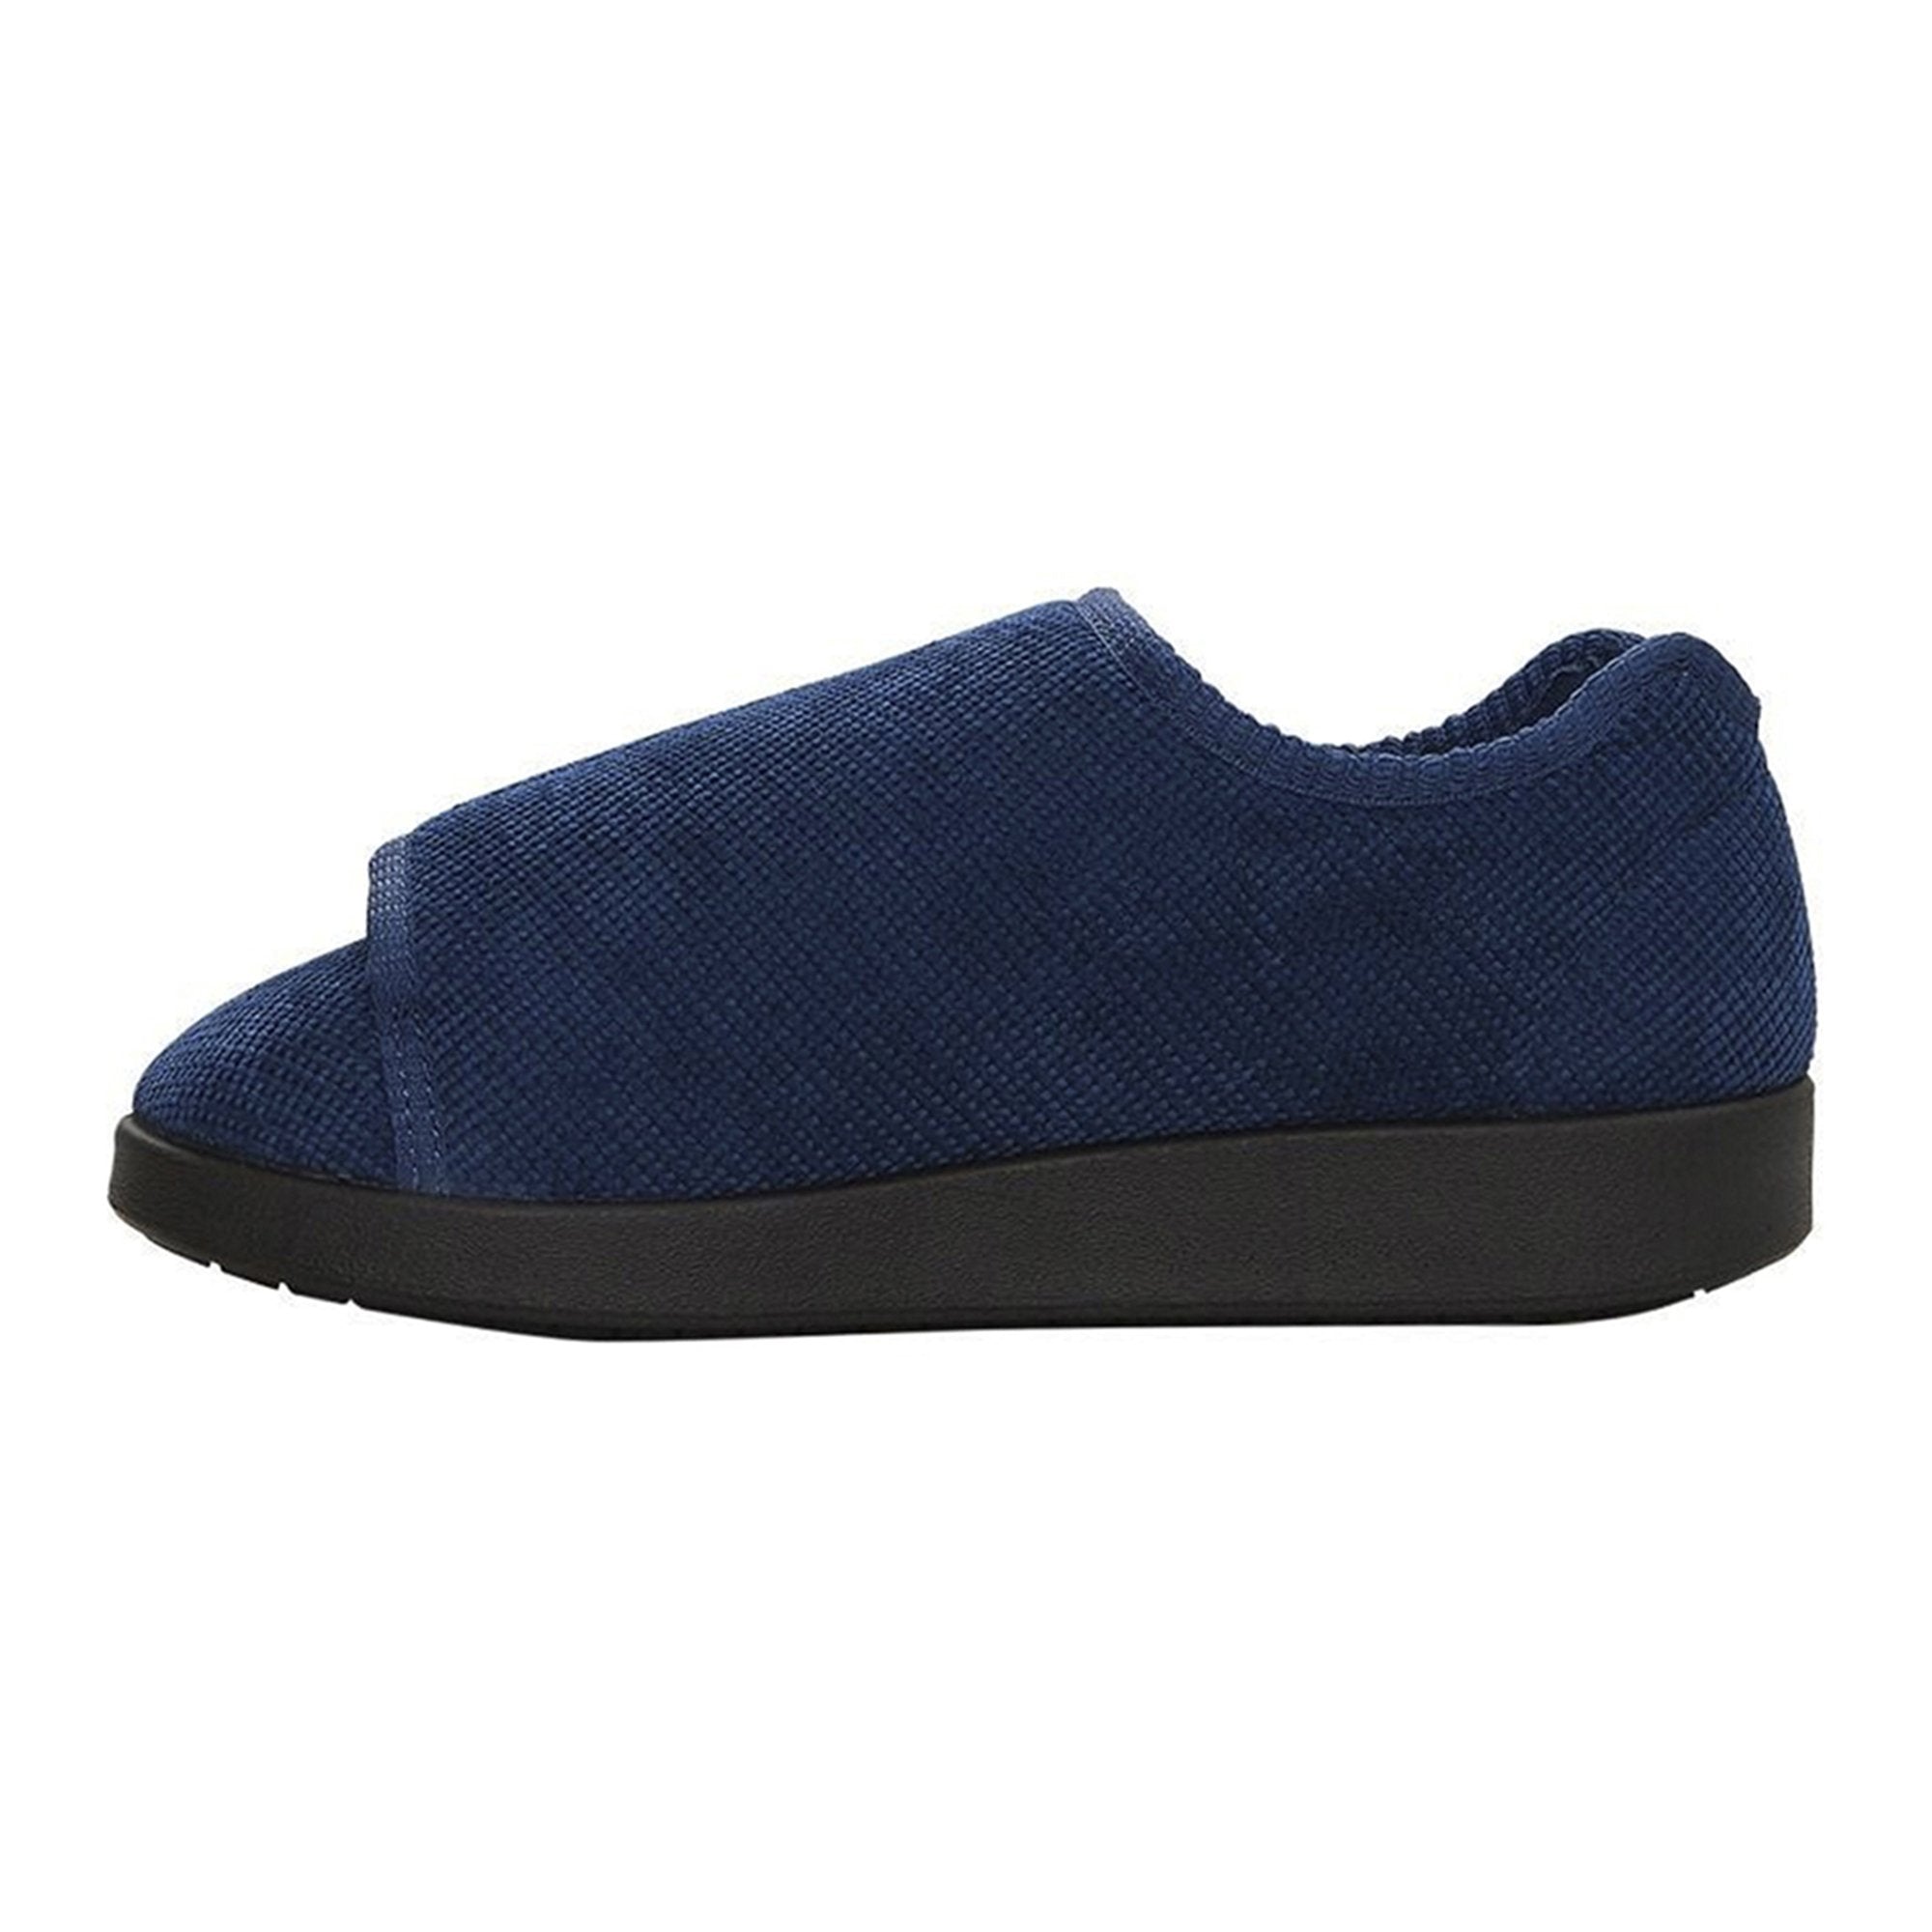 Slippers Silverts® Size 10 / 2X-Wide Navy Blue Easy Closure